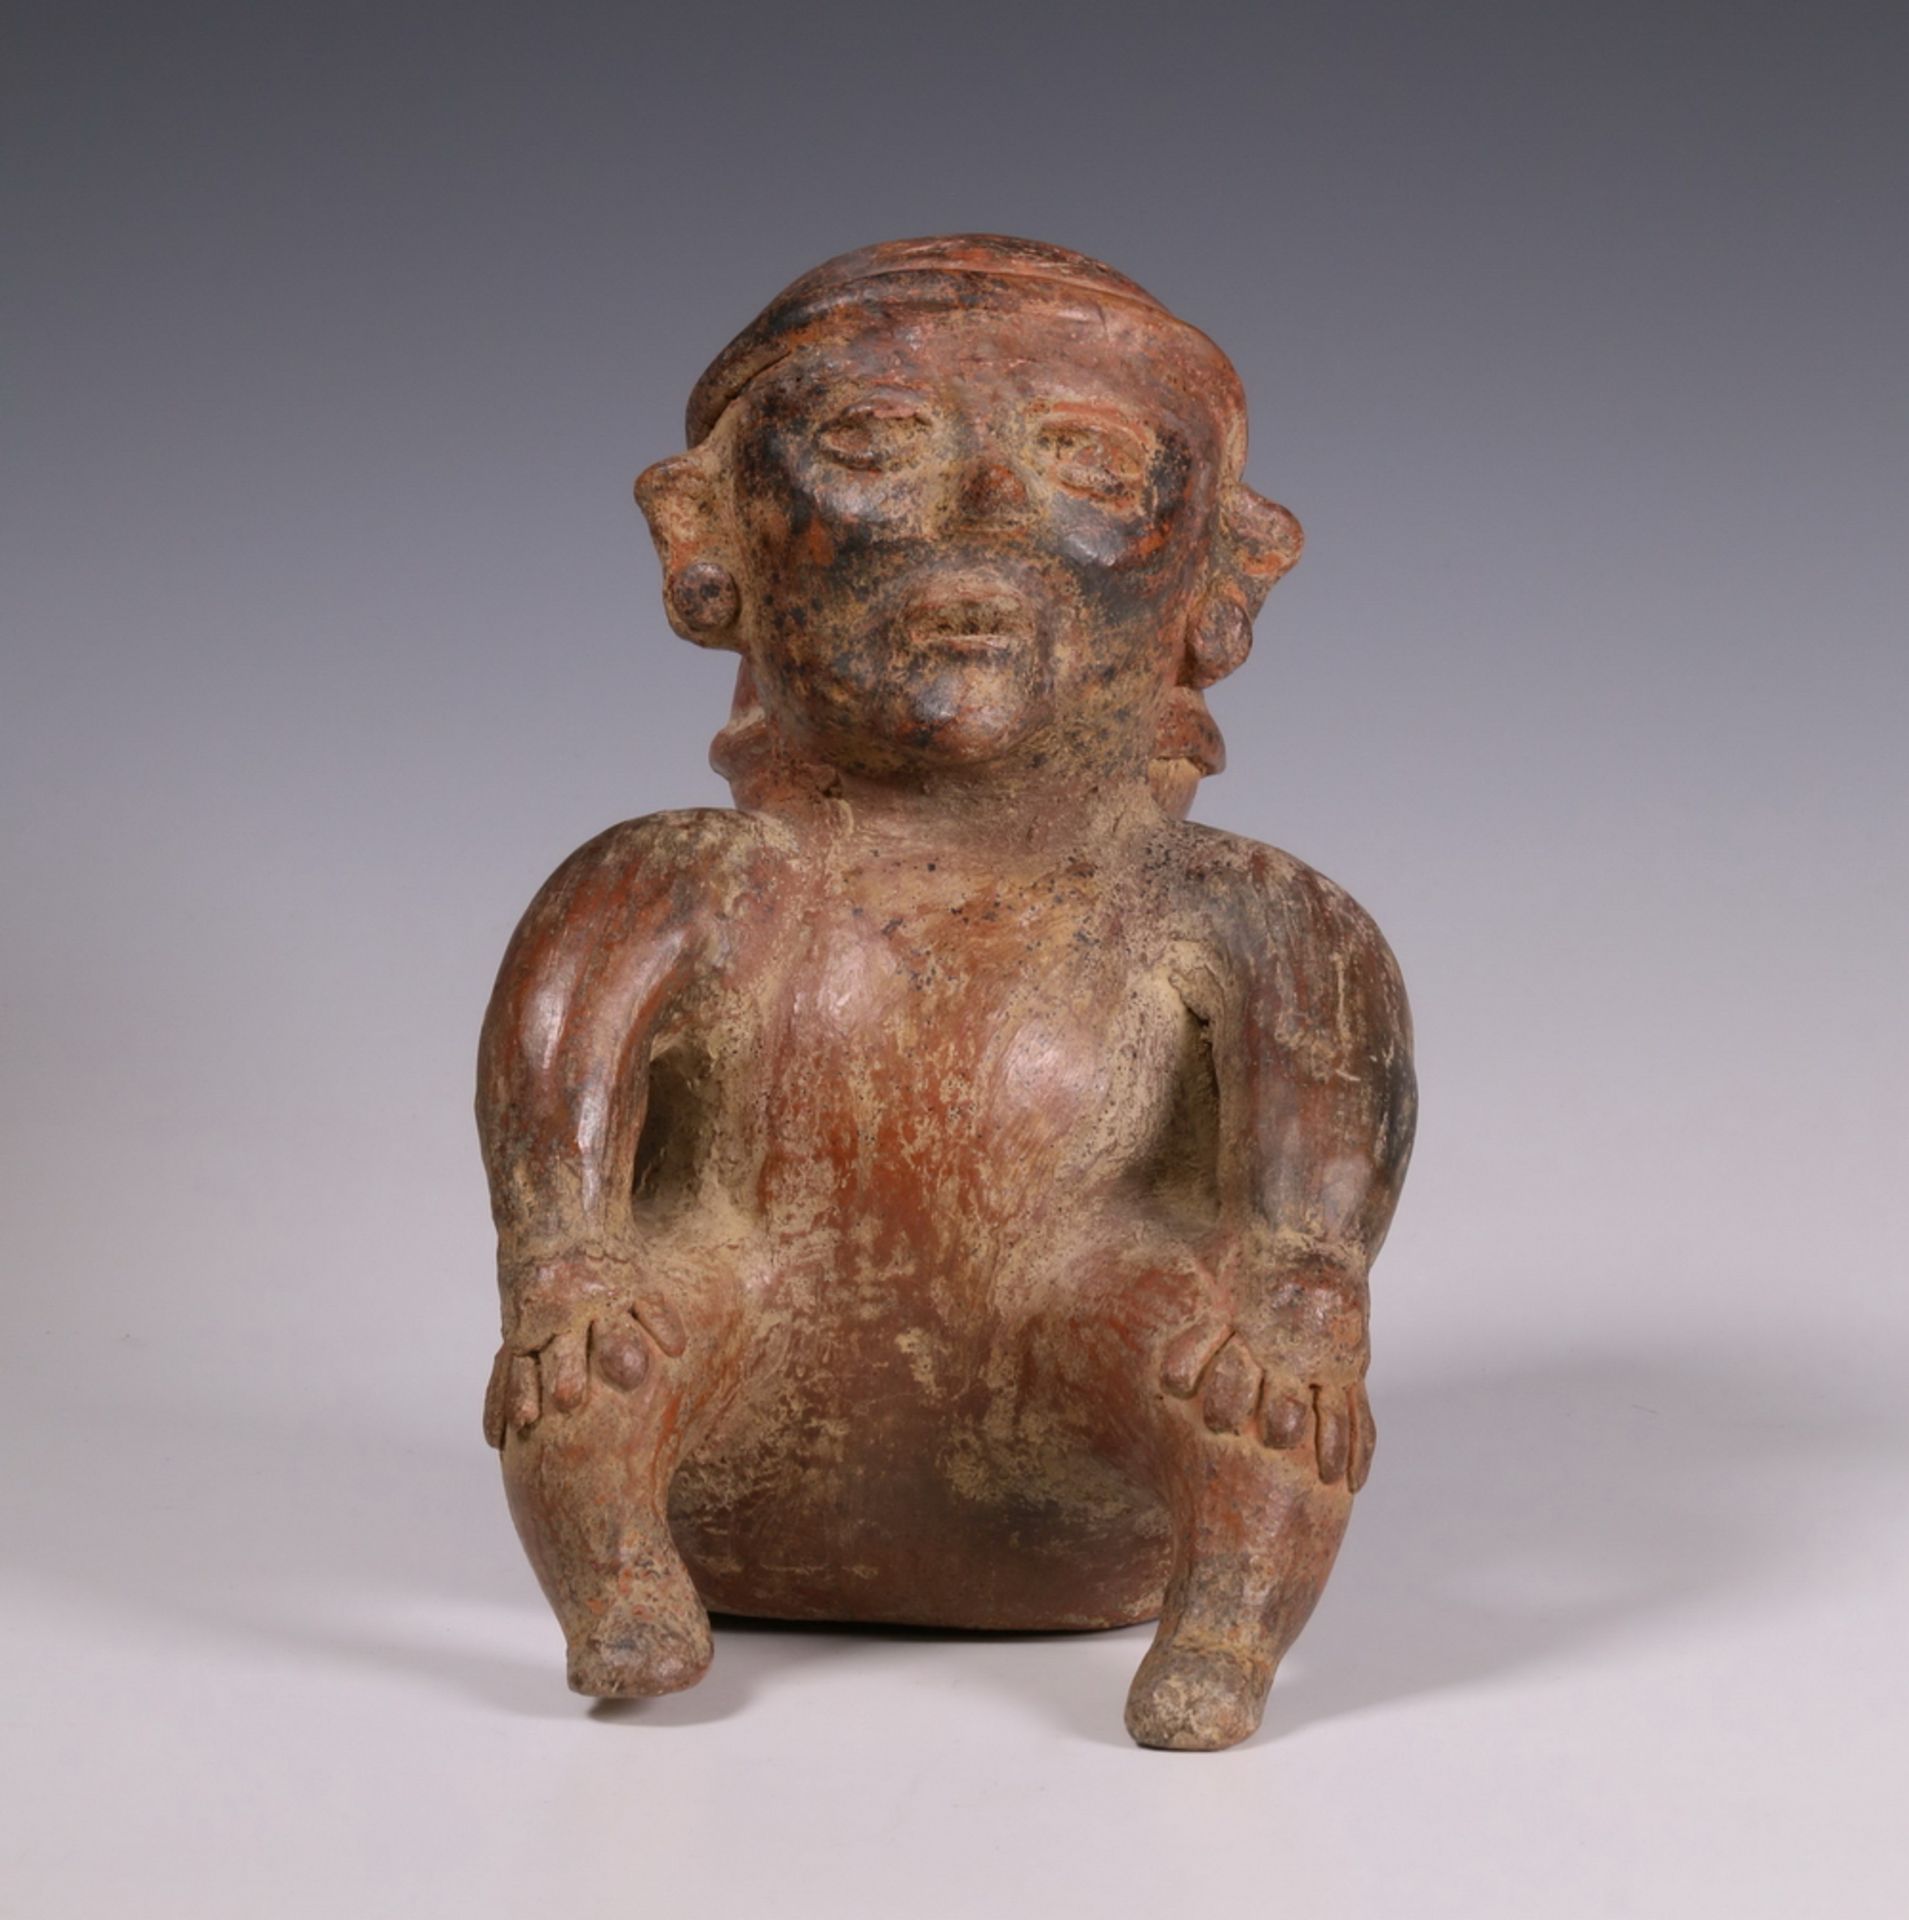 Mexico, Colima, a red earthenware sculpture of a seated figure, 100 BC-250 AD, - Image 3 of 5